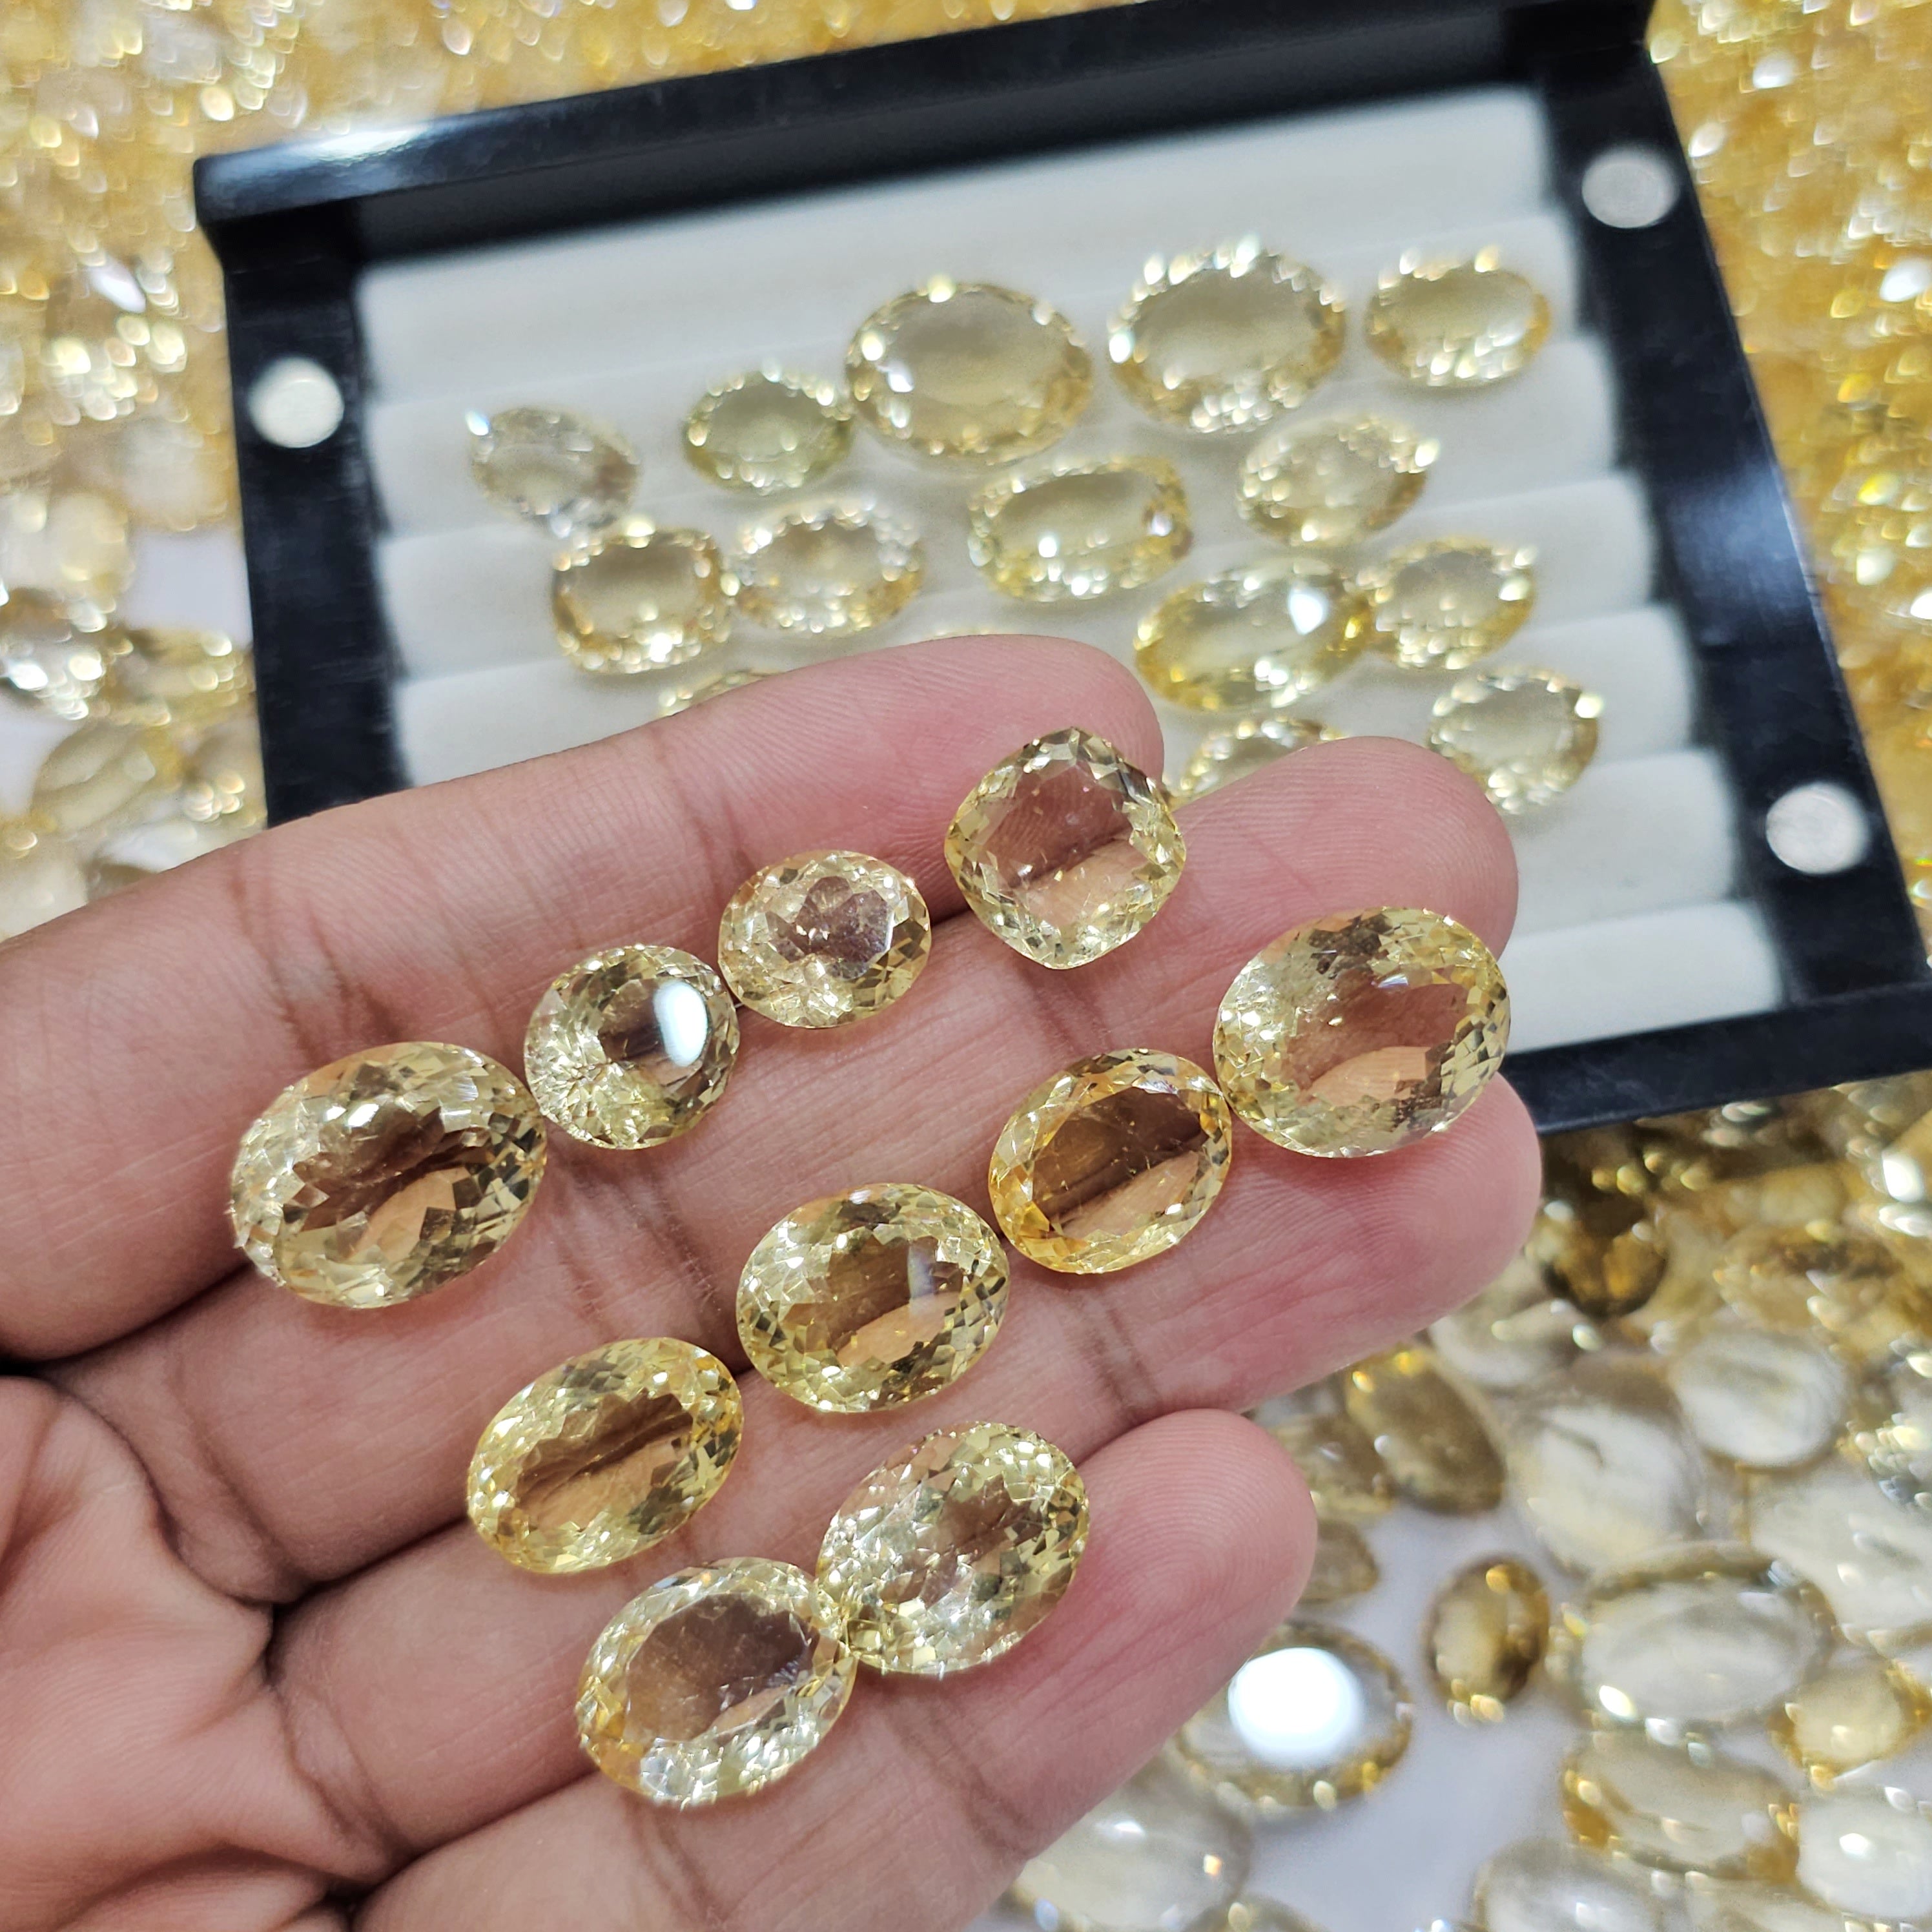 20 Pcs of Faceted Unheated Citrine gemstone | 10mm to 20mm sizes - The LabradoriteKing